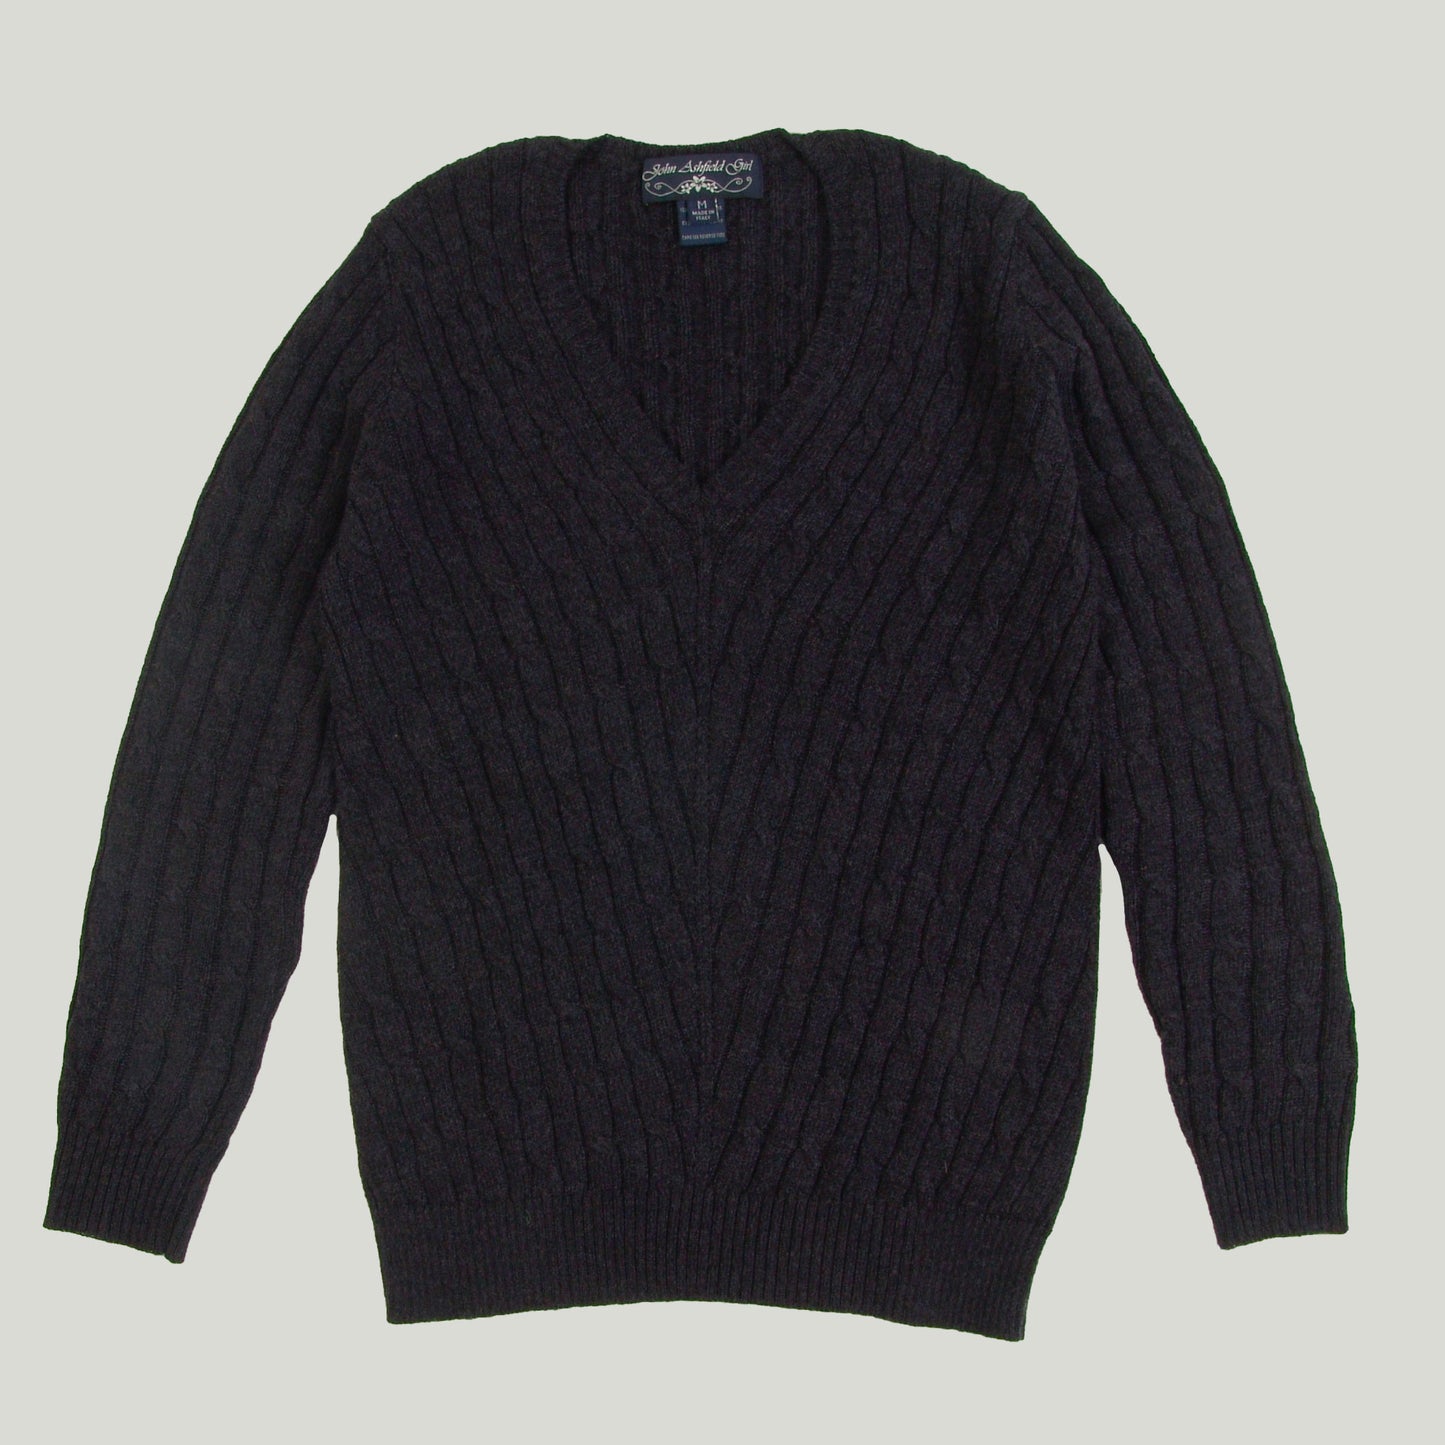 Women's Cable V-Neck sweater